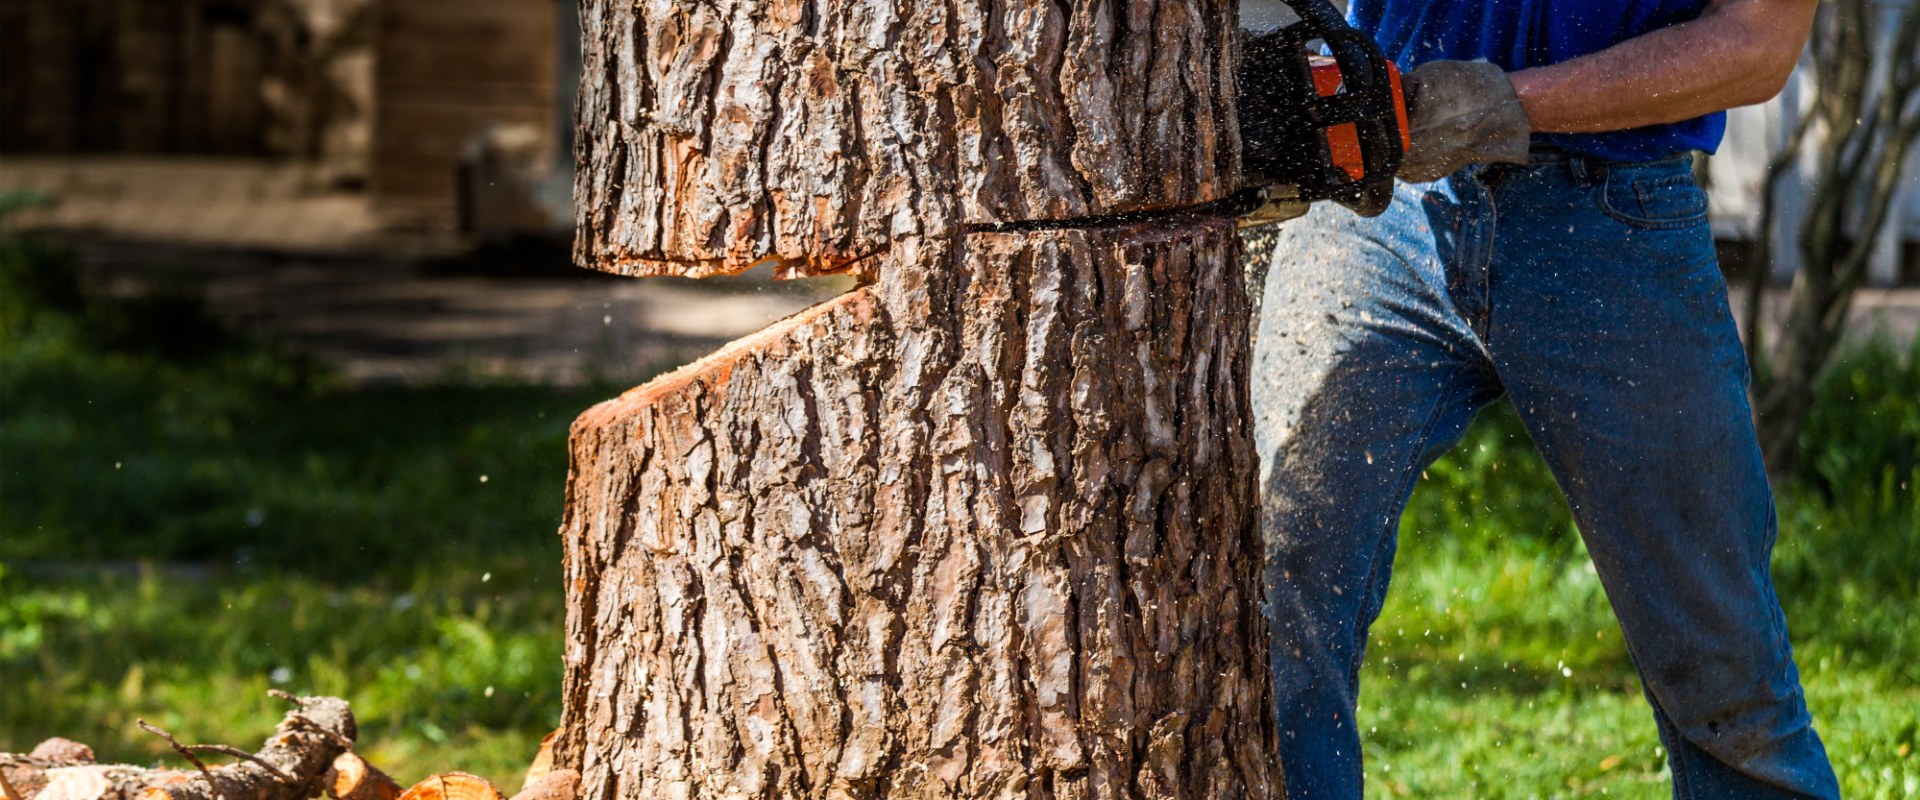 Factors that Affect Tree Trimming Costs